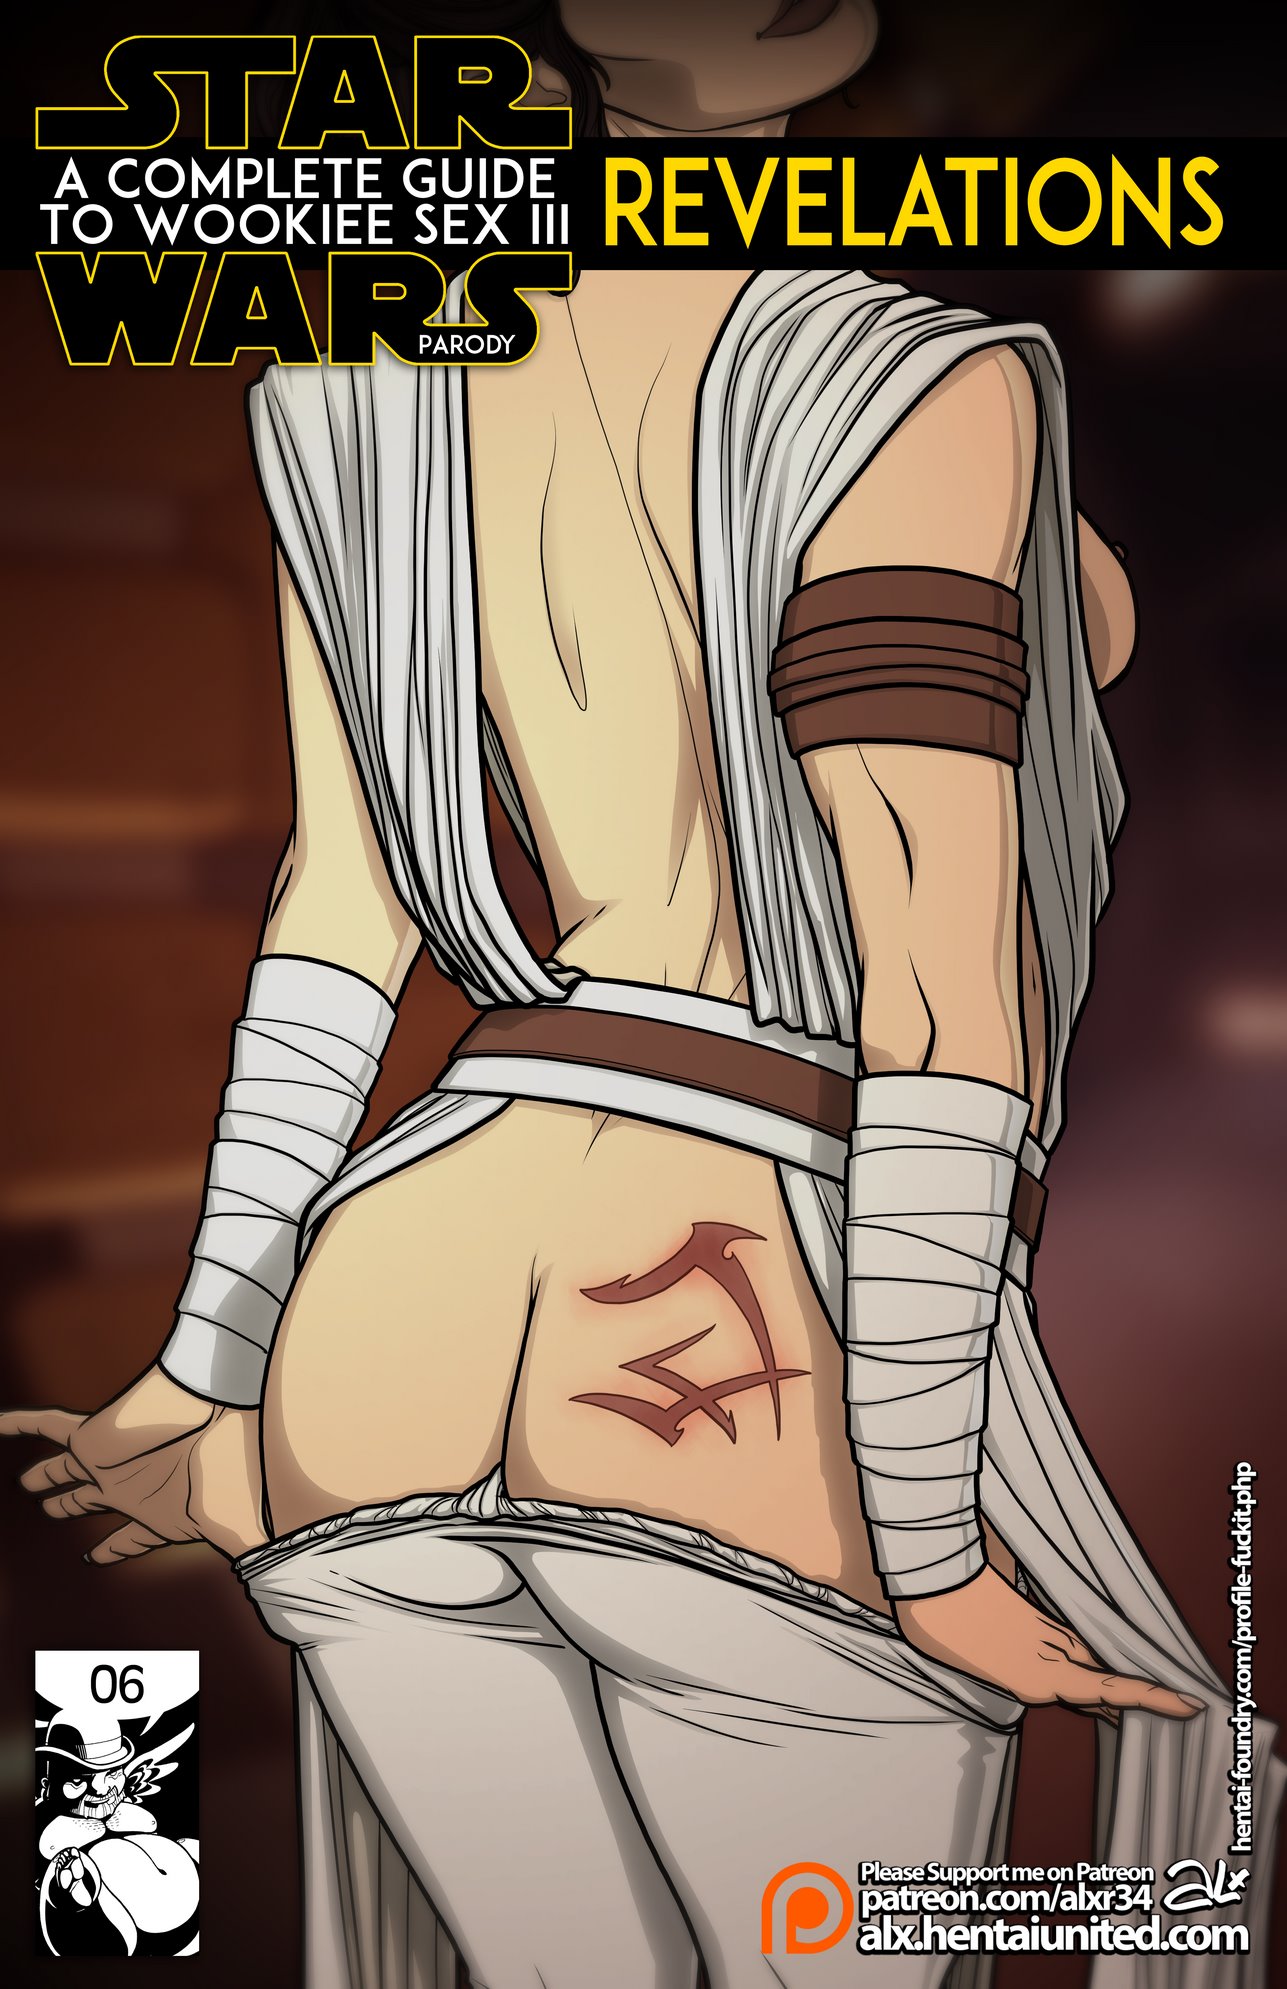 Star Wars Porn - Alx) Star Wars: A Complete Guide to Wookie Sex III porn comic